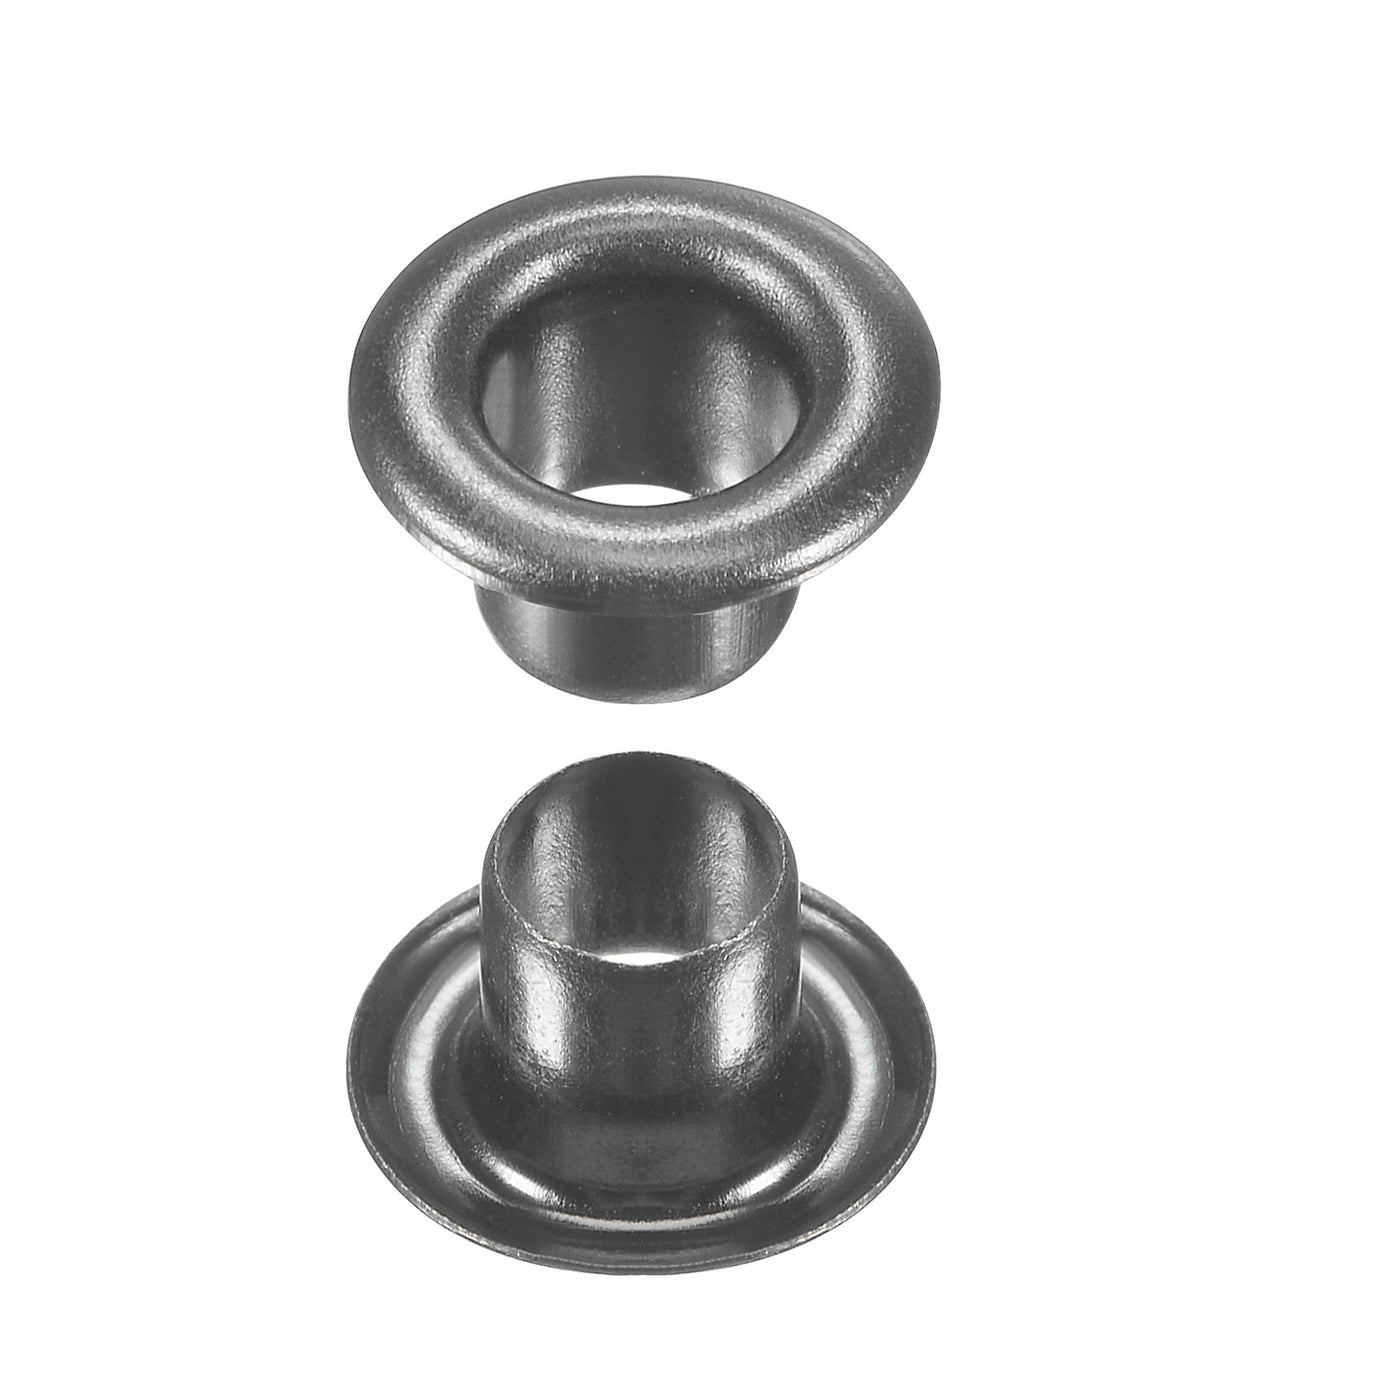 uxcell Uxcell Eyelet with Washer 8x4x4.3mm Copper Grommet Chrome Plated Black 100 Set